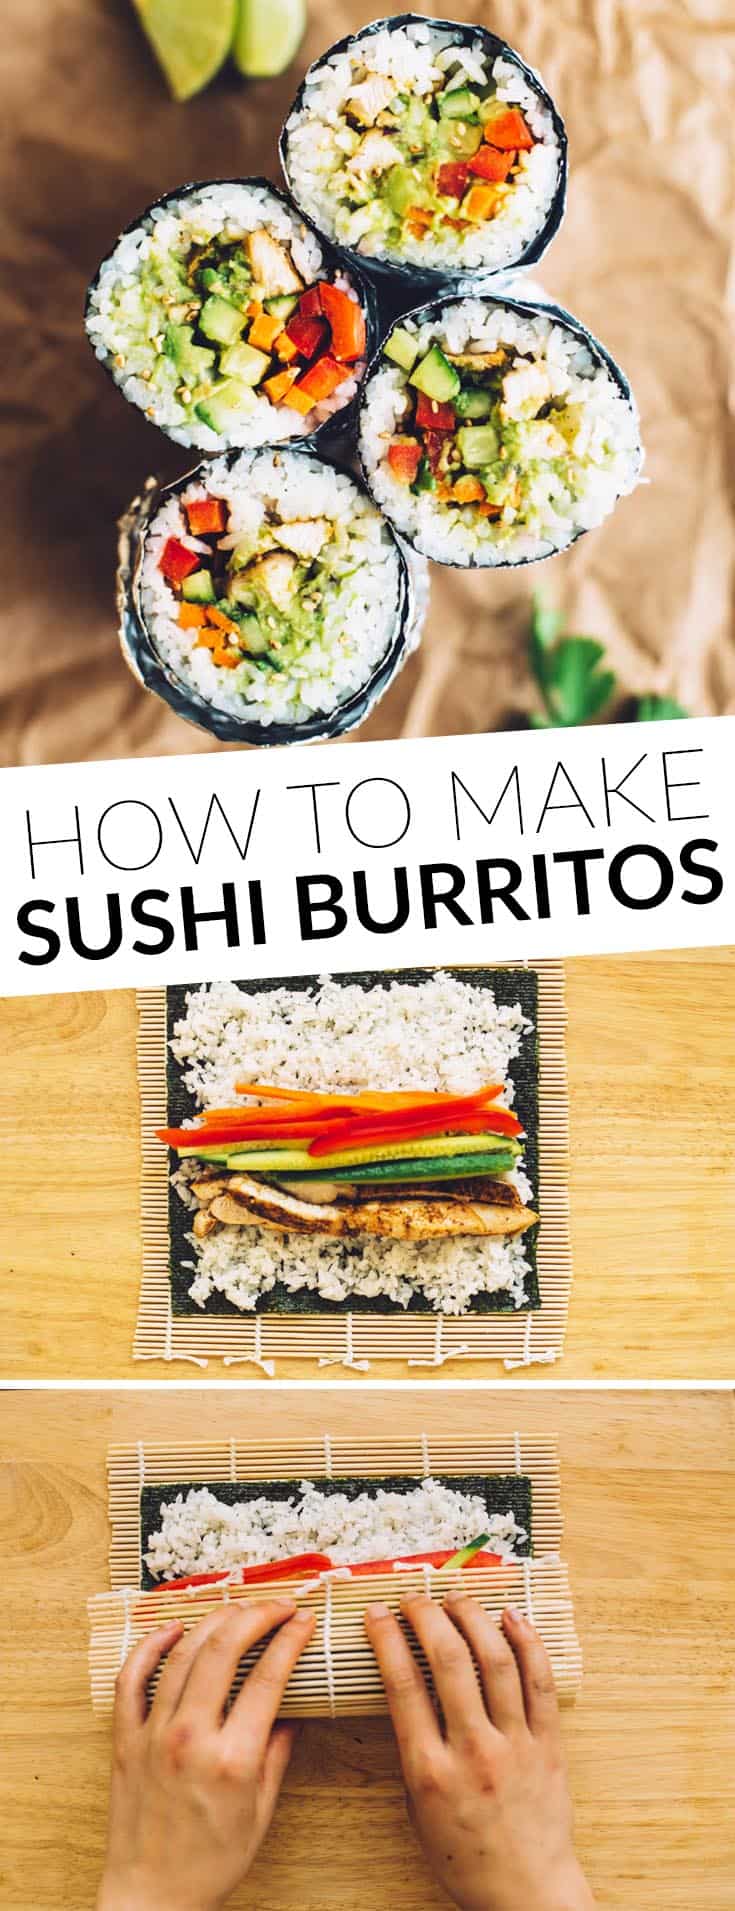 How to Make a Sushi Burrito - easy, healthy comfort food! @healthynibs